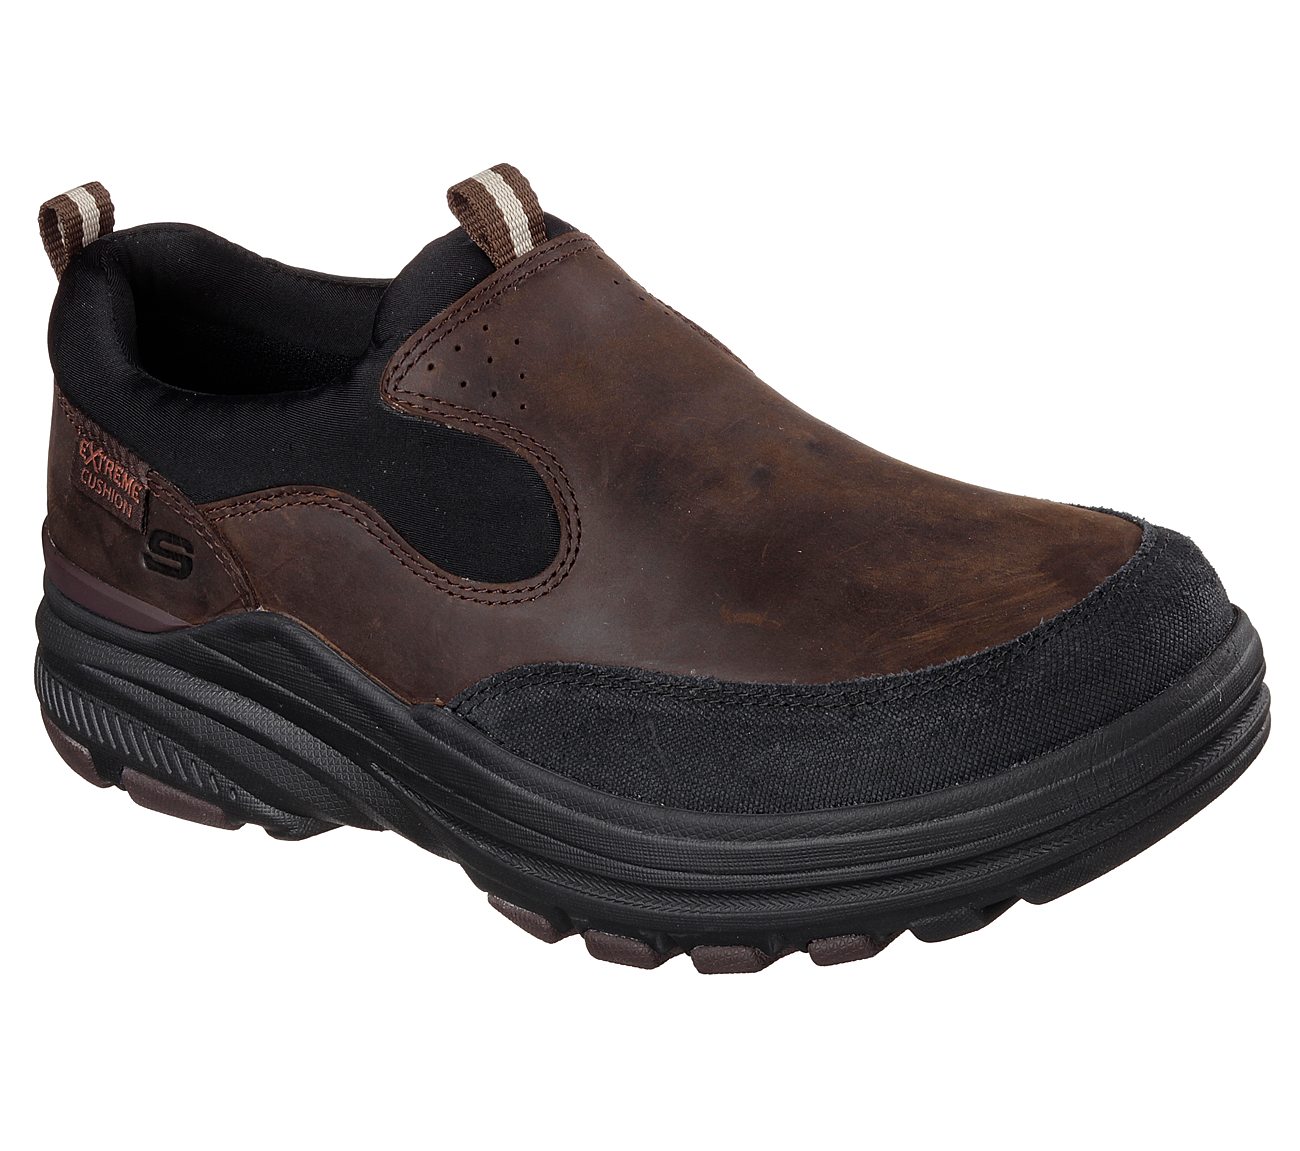 Buy SKECHERS Relaxed Fit: Holdren - Darwood USA Casuals Shoes